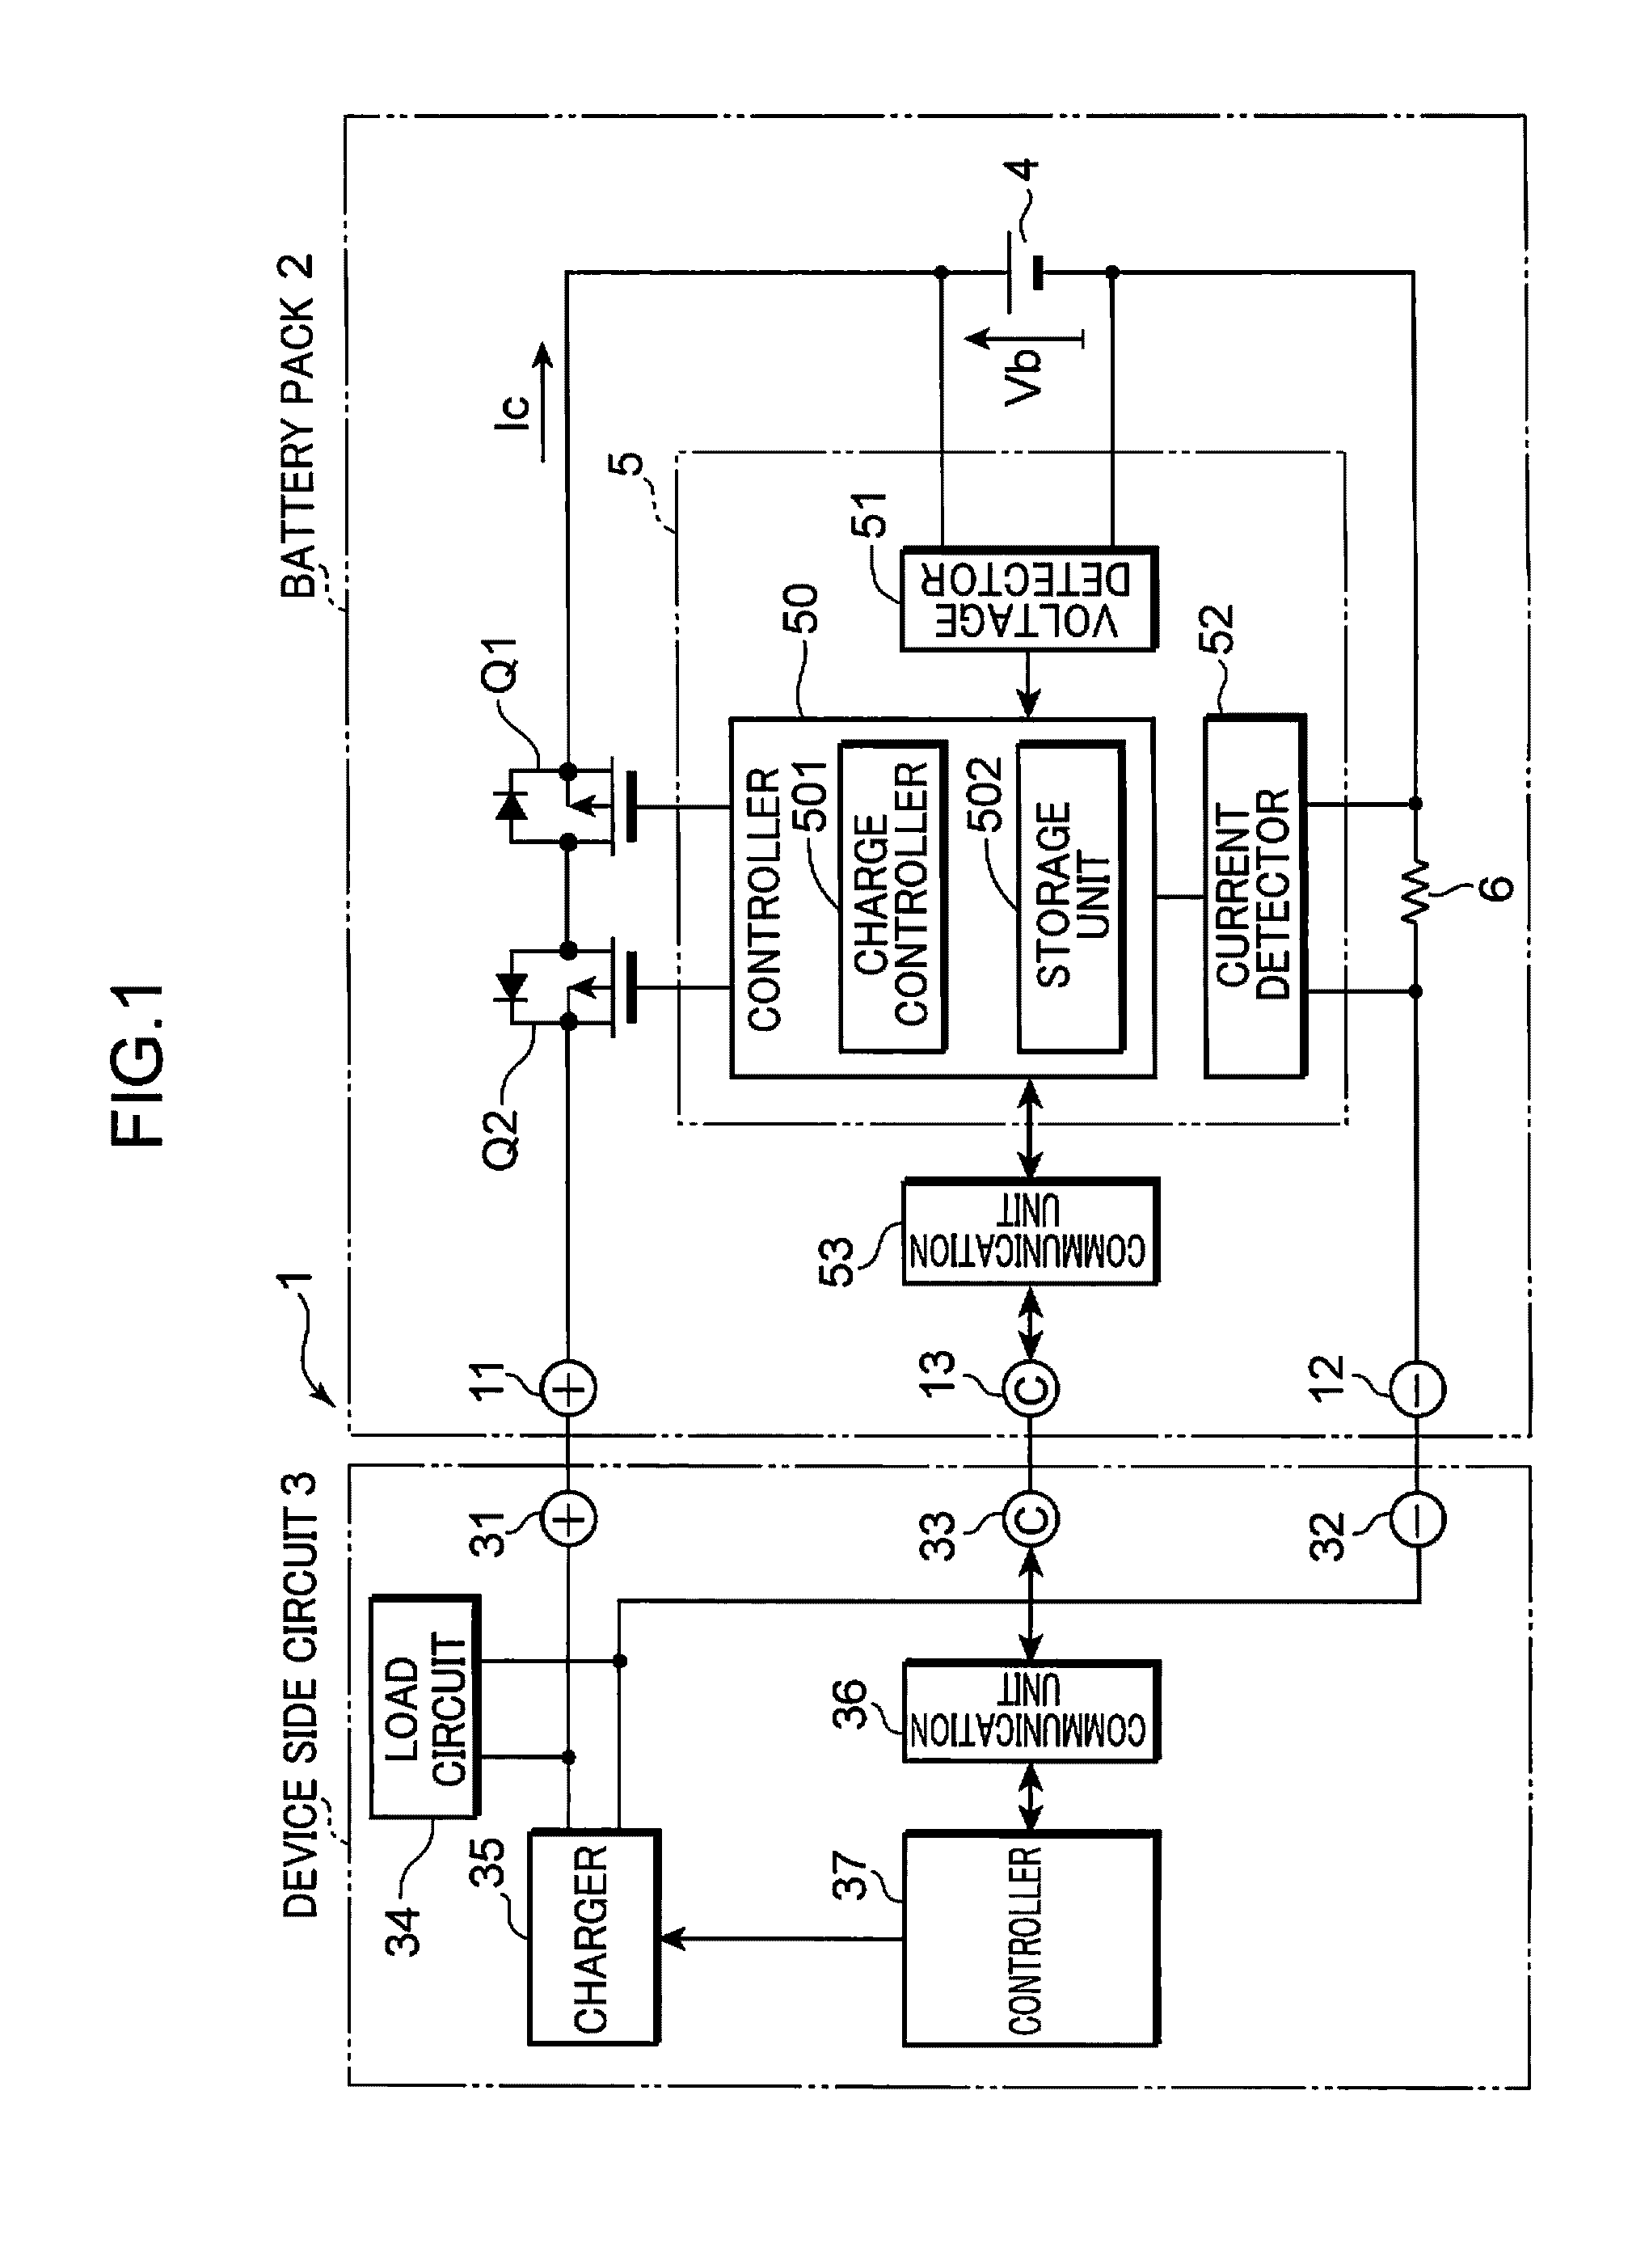 Charge control circuit, battery pack, and charging system